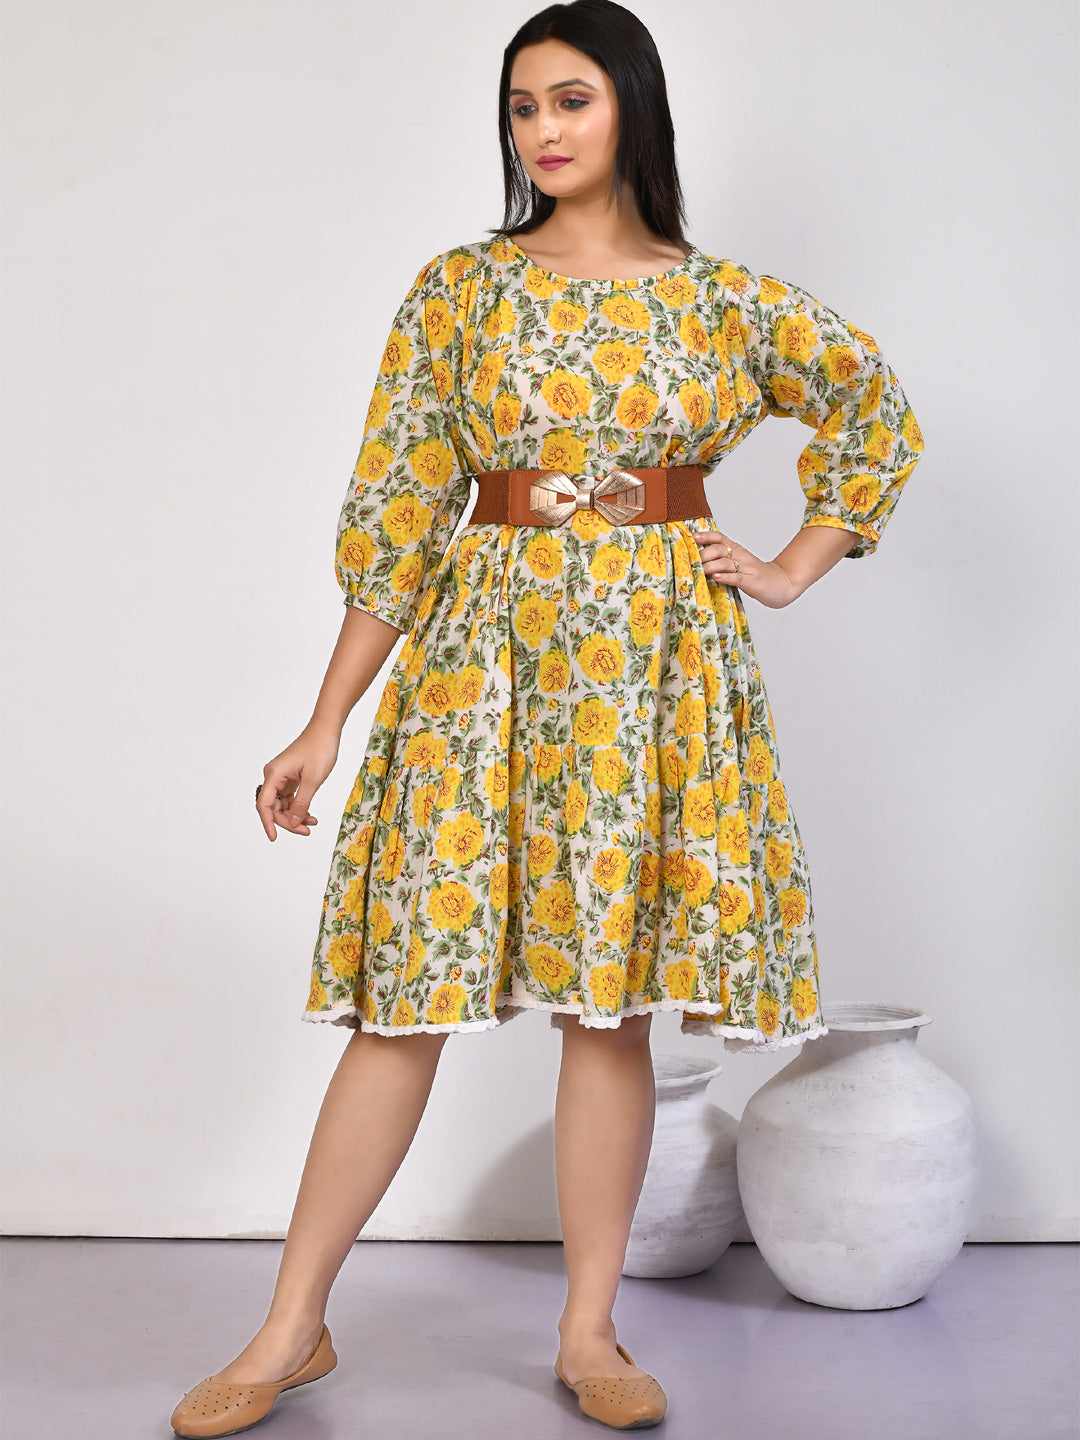 Ishya  handprinted floral tiered cotton midi dress perfect for summer holidays-2